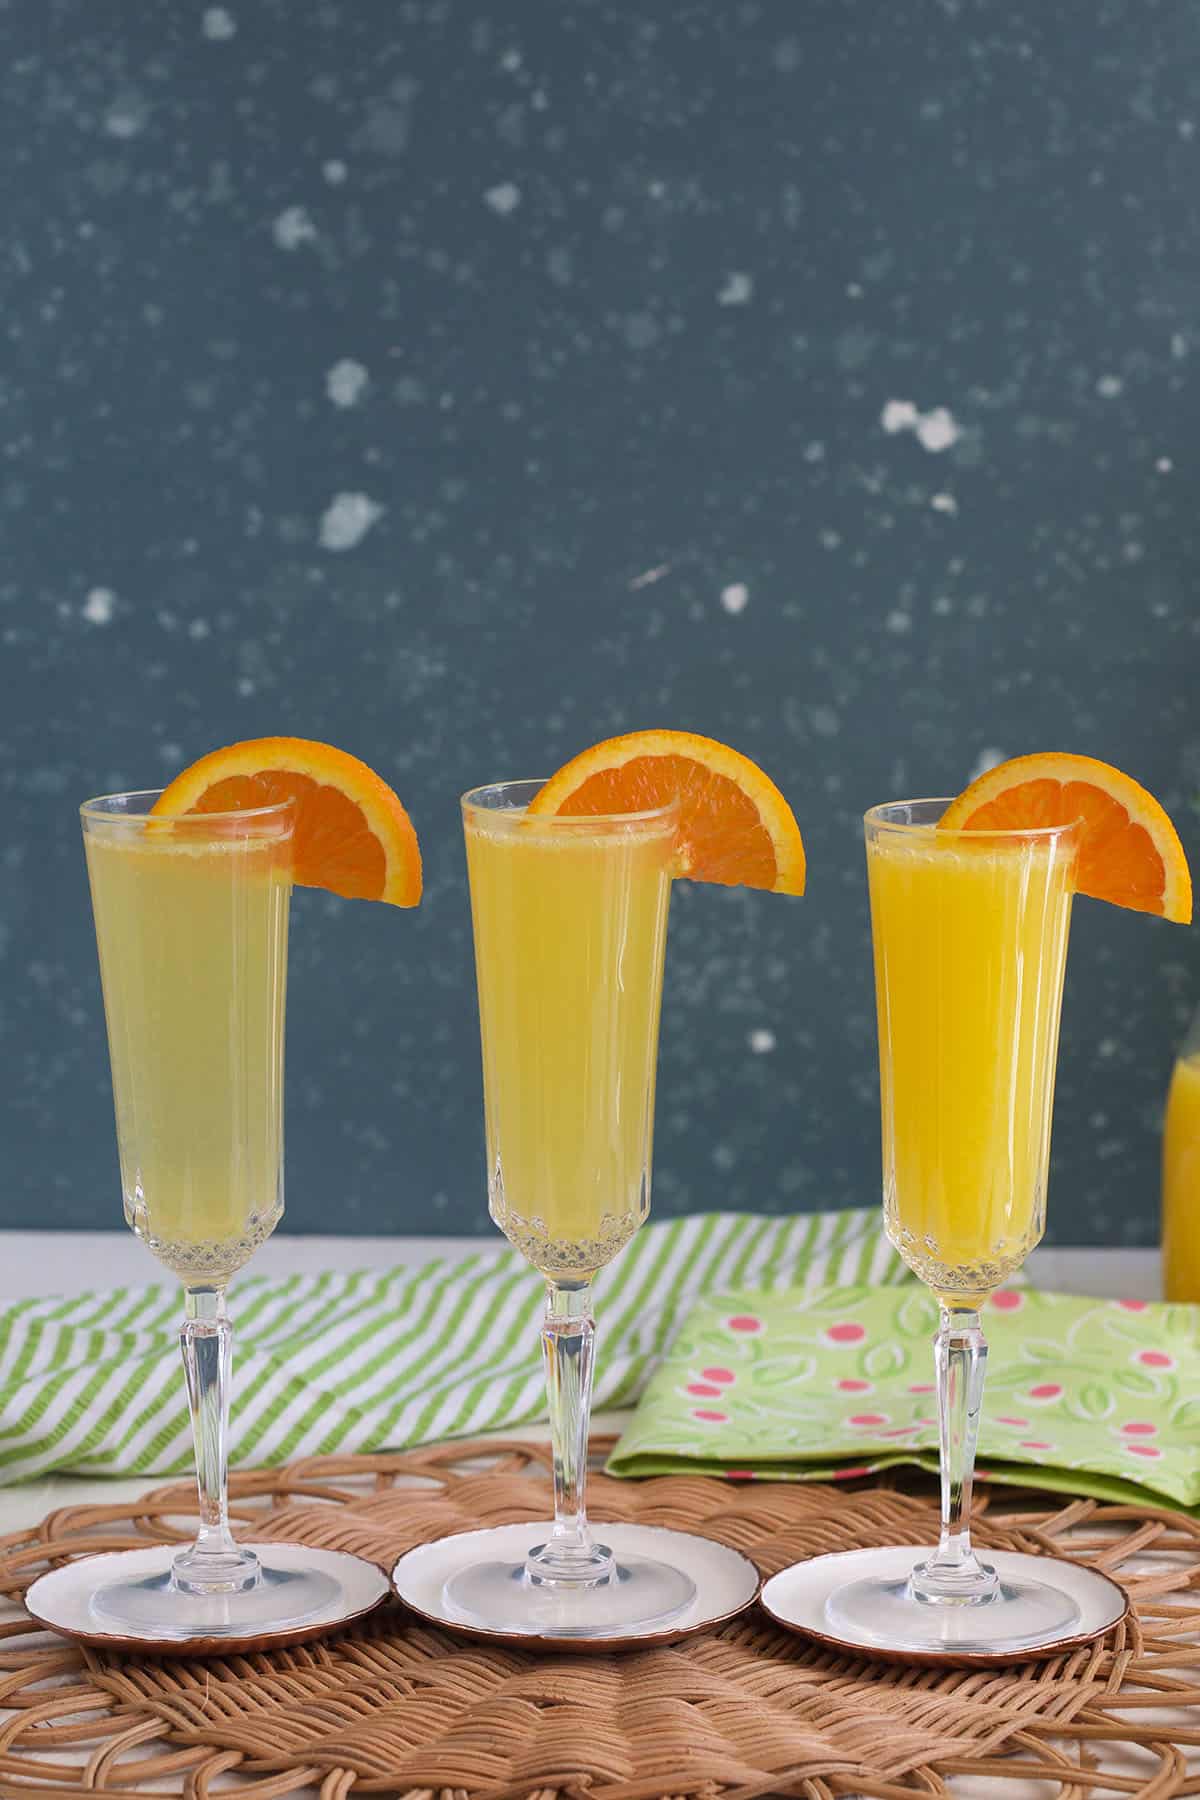 Three glasses of mimosas are placed on a brown place mat.